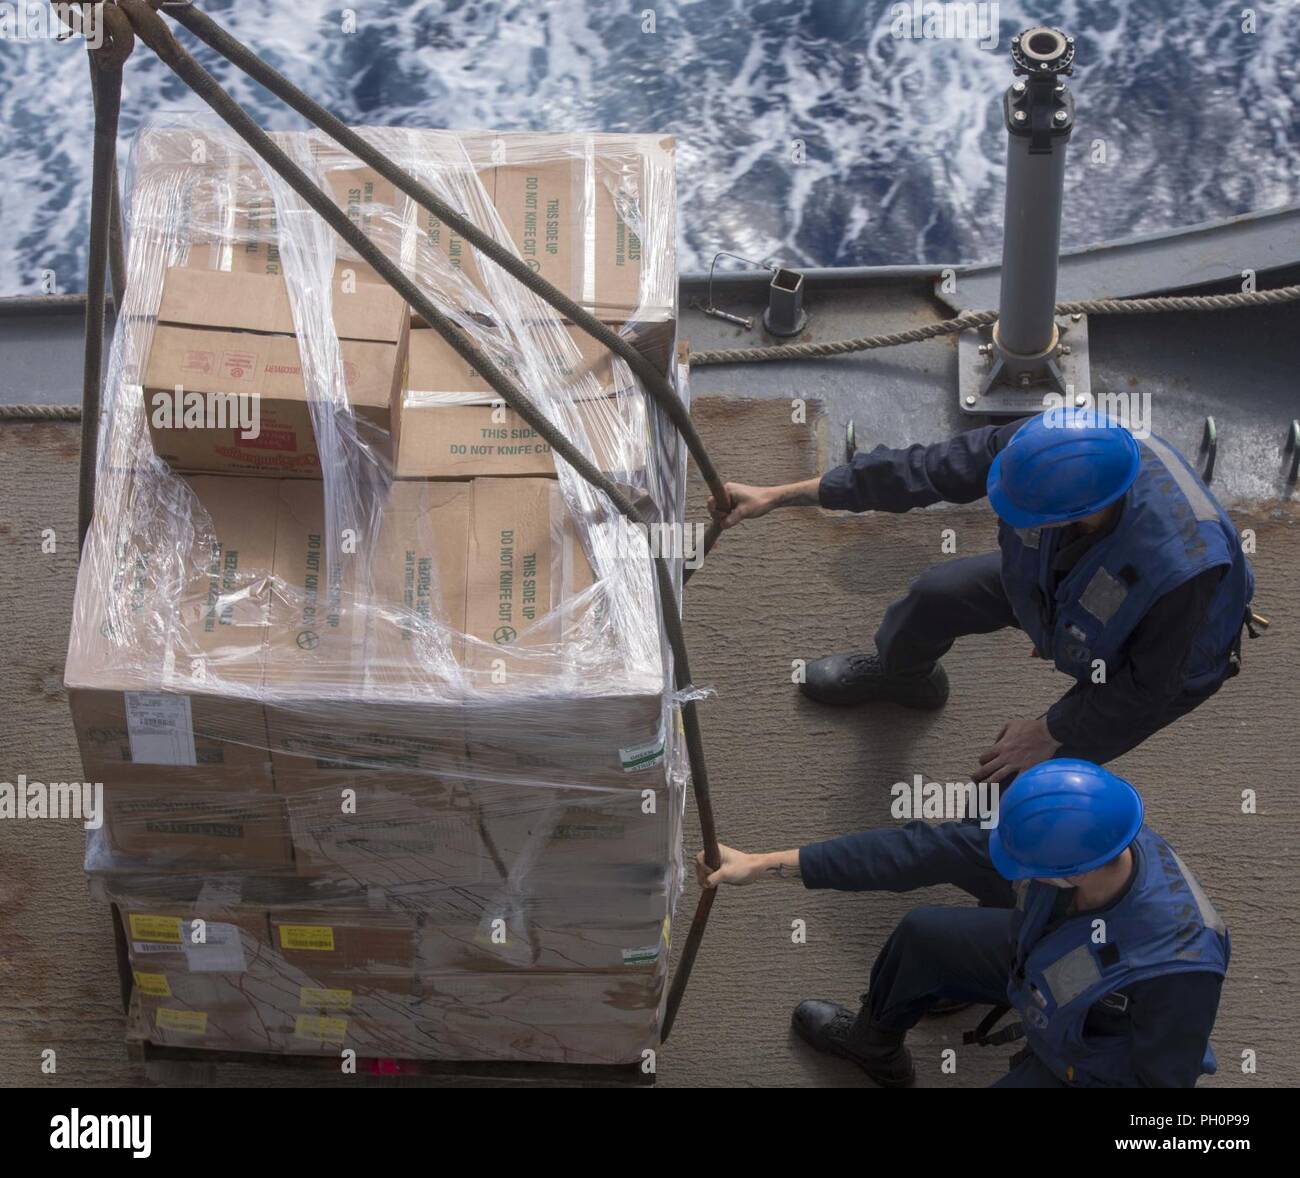 MEDITERRANEAN SEA (June 14, 2018) Seaman Trenton Heil, bottom, from Ennis, Texas, and Boatswain’s Mate Seaman John Baltuskonis, from Waldwood, New Jersey, receive cargo at the replenishment station aboard the San Antonio-class amphibious transport dock ship USS New York (LPD 21) during a replenishment-at-sea June 14, 2018. New York, homeported in Mayport, Florida, is conducting naval operations in the U.S. 6th Fleet area of operations in support of U.S. national security interests in Europe and Africa. Stock Photo